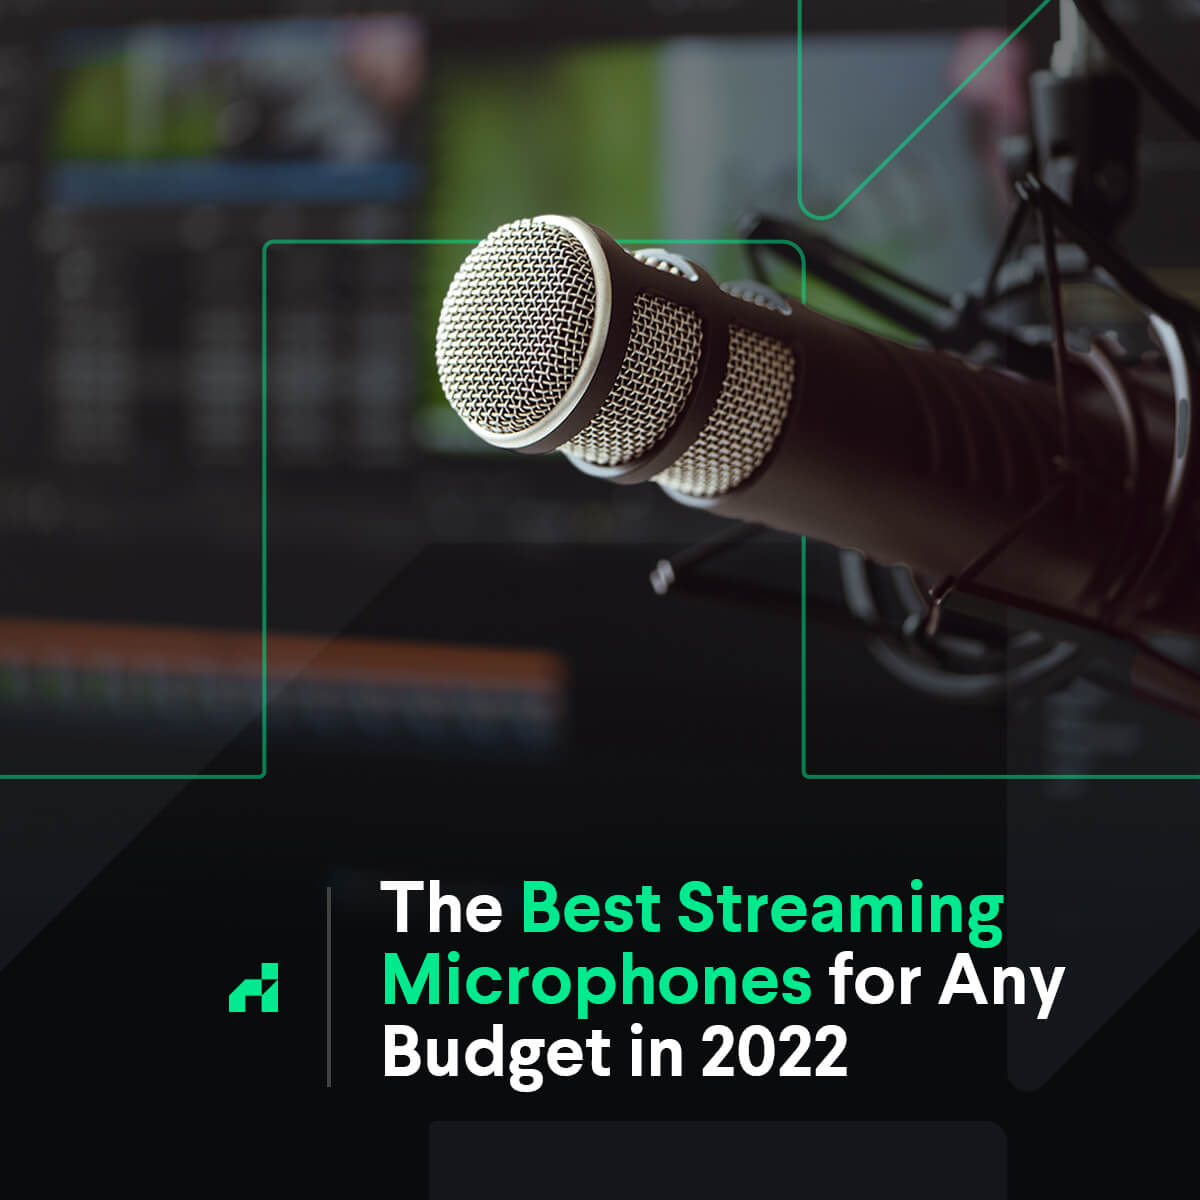 https://rehack.com/wp-content/uploads/2020/07/Facebook-the-best-streaming-microphones-for-any-budget-in-2022.jpg